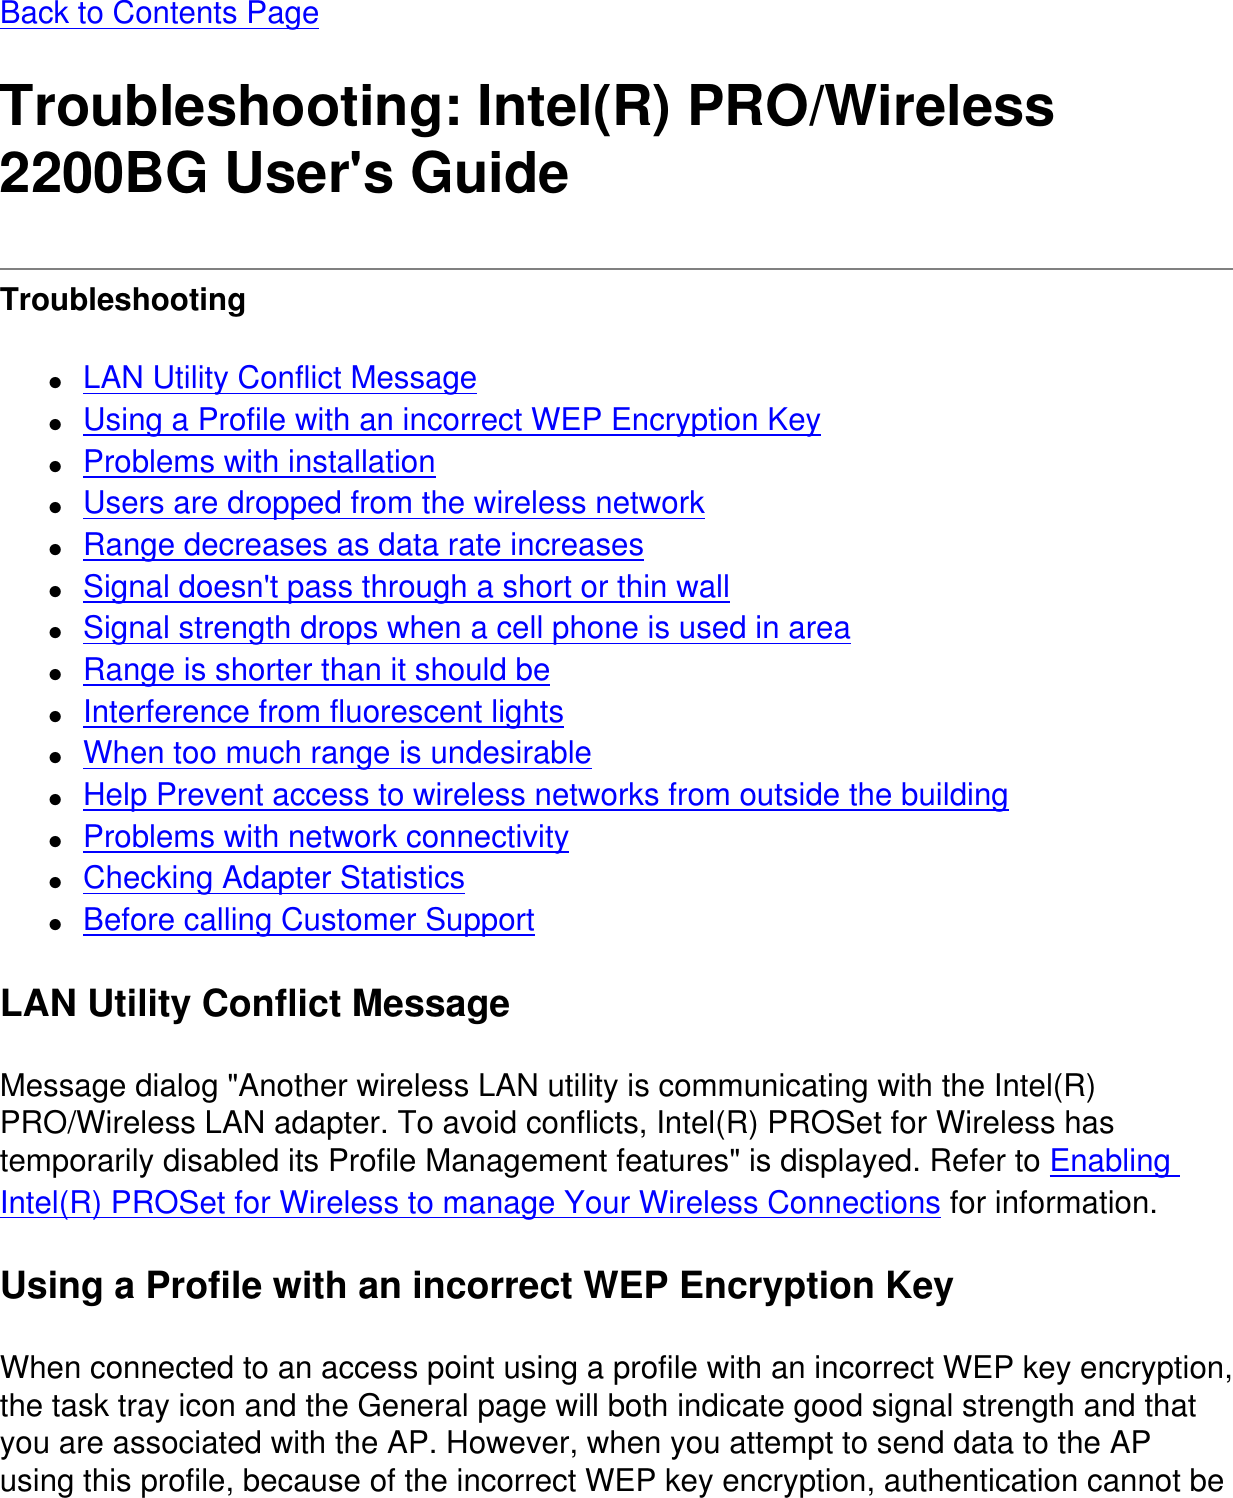 Back to Contents PageTroubleshooting: Intel(R) PRO/Wireless 2200BG User&apos;s GuideTroubleshooting ●     LAN Utility Conflict Message●     Using a Profile with an incorrect WEP Encryption Key●     Problems with installation●     Users are dropped from the wireless network●     Range decreases as data rate increases●     Signal doesn&apos;t pass through a short or thin wall●     Signal strength drops when a cell phone is used in area●     Range is shorter than it should be●     Interference from fluorescent lights●     When too much range is undesirable●     Help Prevent access to wireless networks from outside the building●     Problems with network connectivity●     Checking Adapter Statistics●     Before calling Customer SupportLAN Utility Conflict MessageMessage dialog &quot;Another wireless LAN utility is communicating with the Intel(R) PRO/Wireless LAN adapter. To avoid conflicts, Intel(R) PROSet for Wireless has temporarily disabled its Profile Management features&quot; is displayed. Refer to Enabling Intel(R) PROSet for Wireless to manage Your Wireless Connections for information.Using a Profile with an incorrect WEP Encryption KeyWhen connected to an access point using a profile with an incorrect WEP key encryption, the task tray icon and the General page will both indicate good signal strength and that you are associated with the AP. However, when you attempt to send data to the AP using this profile, because of the incorrect WEP key encryption, authentication cannot be 